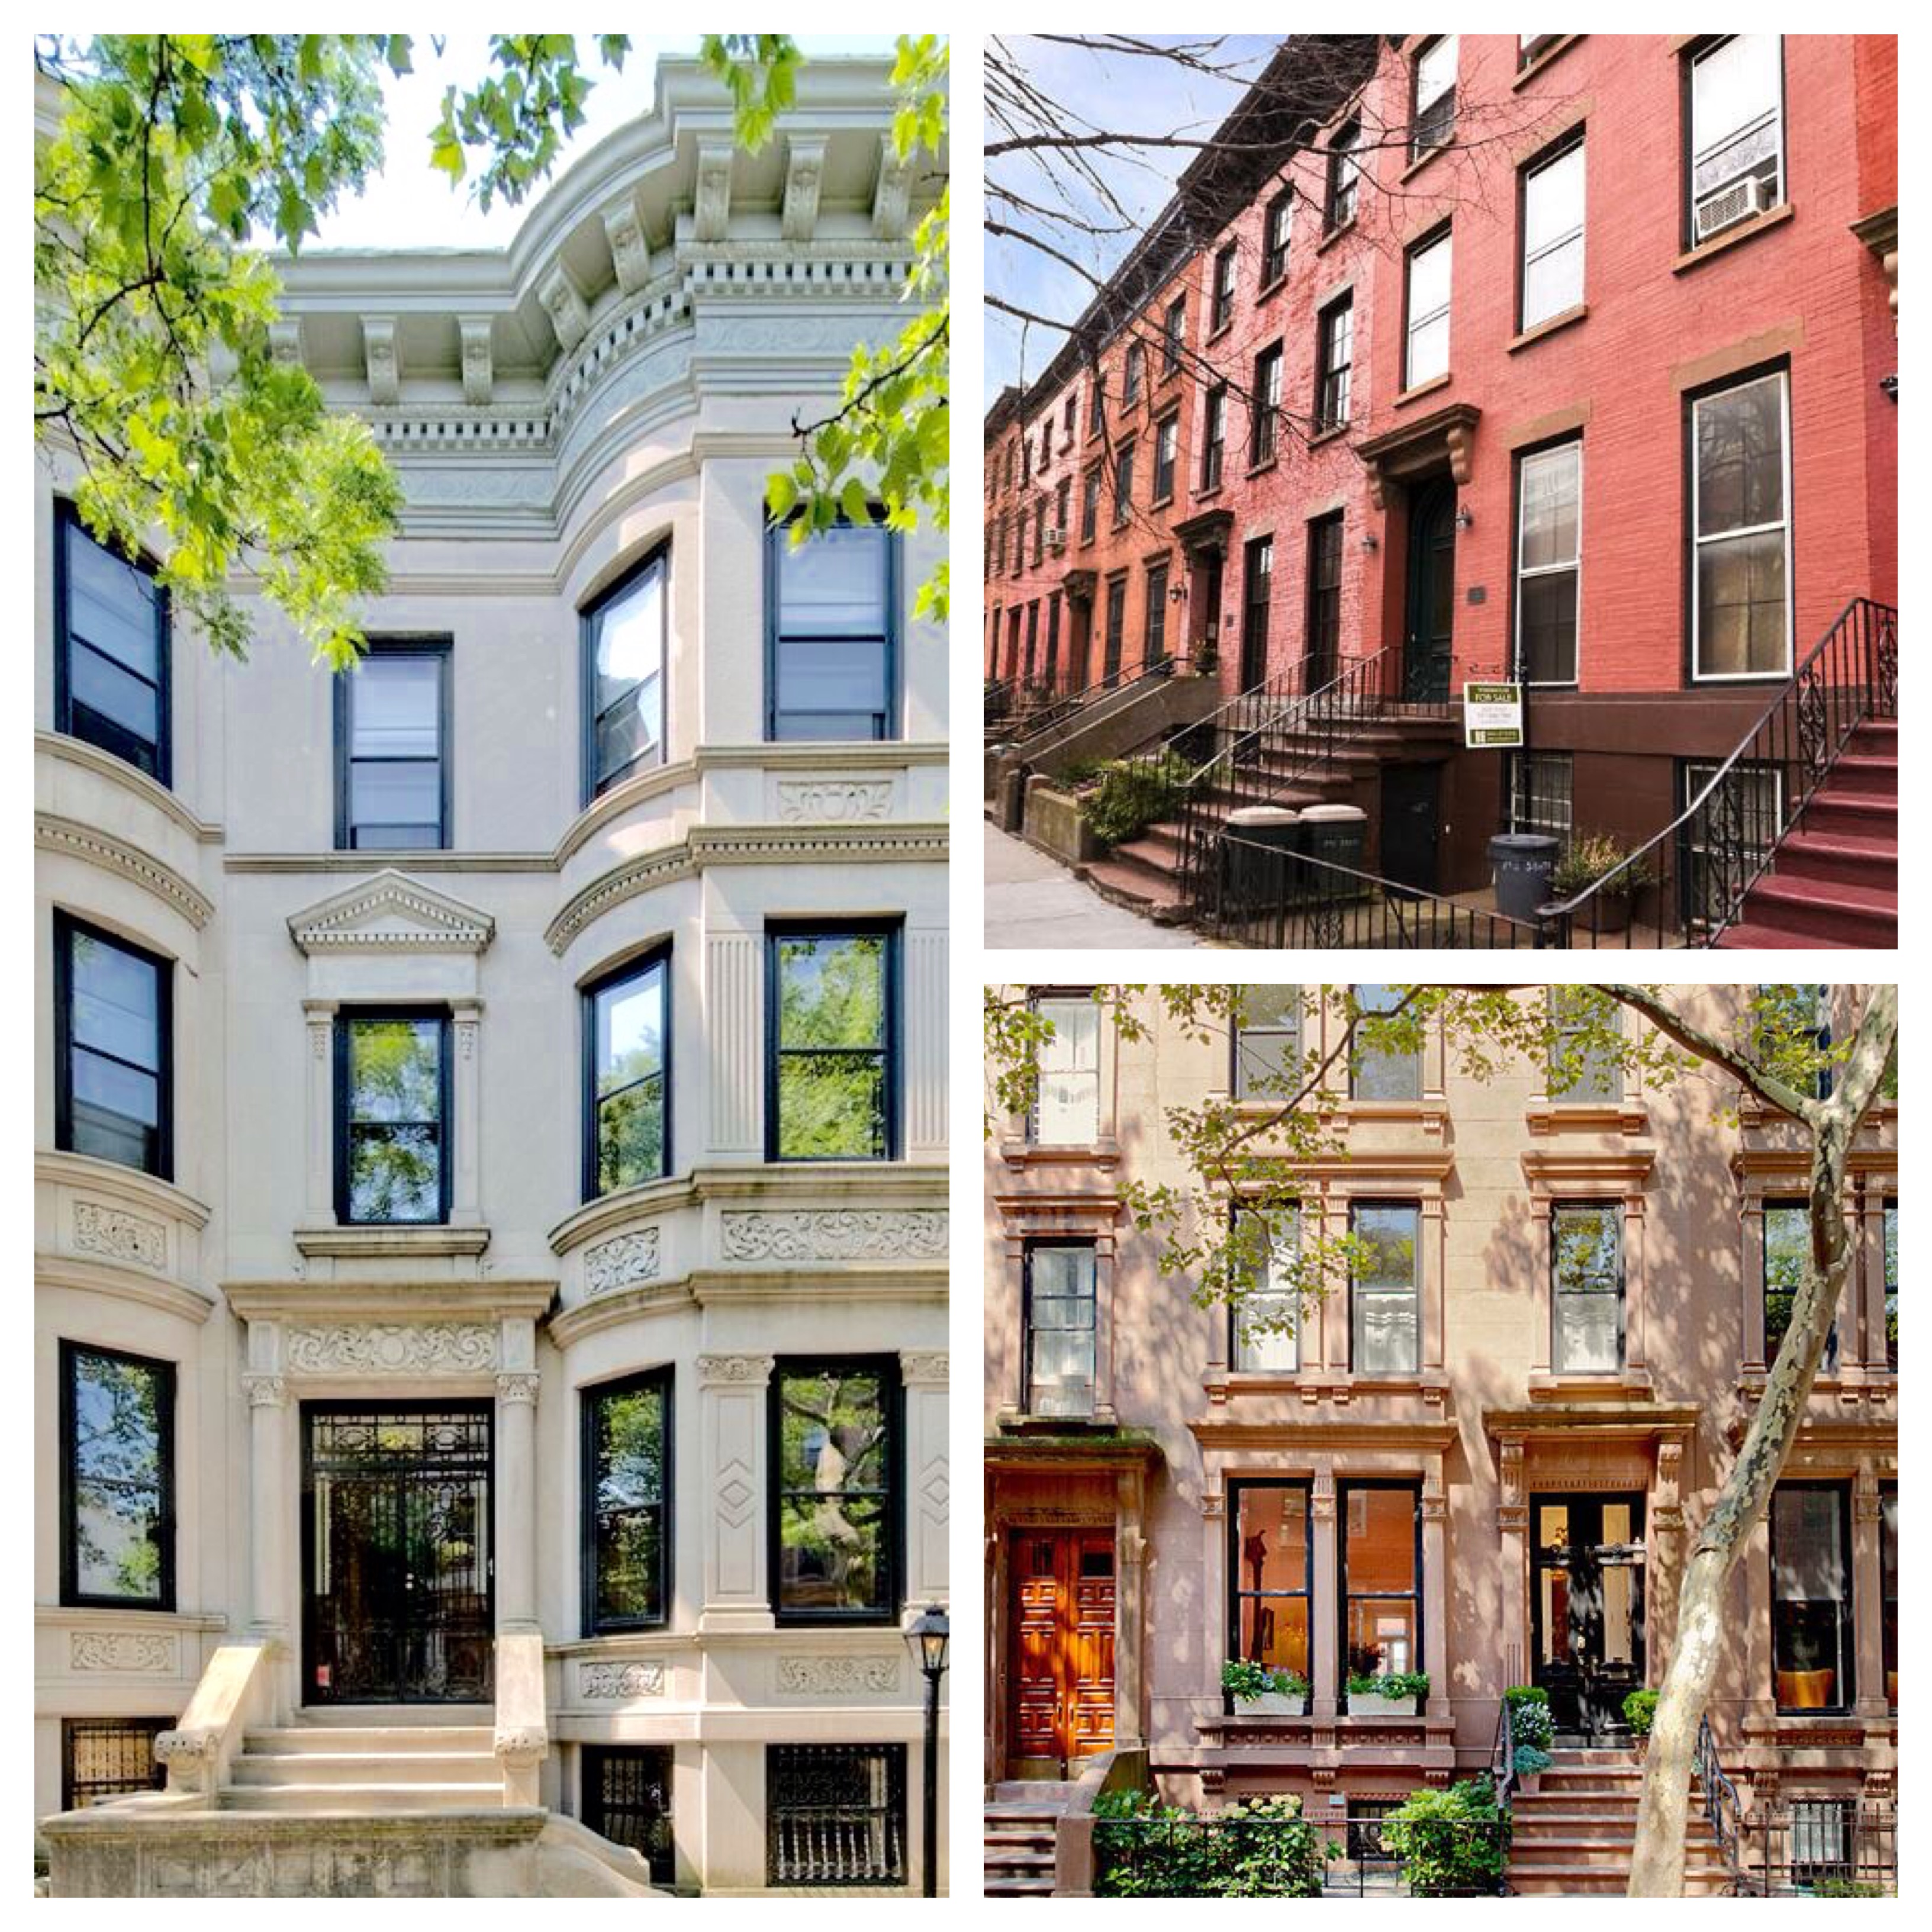 The most expensive blocks in Park Slope (left), Boerum Hill (top right), and Brooklyn Heights (bottom right) offer a variety of home options for those willing to spend upwards of $3M. 